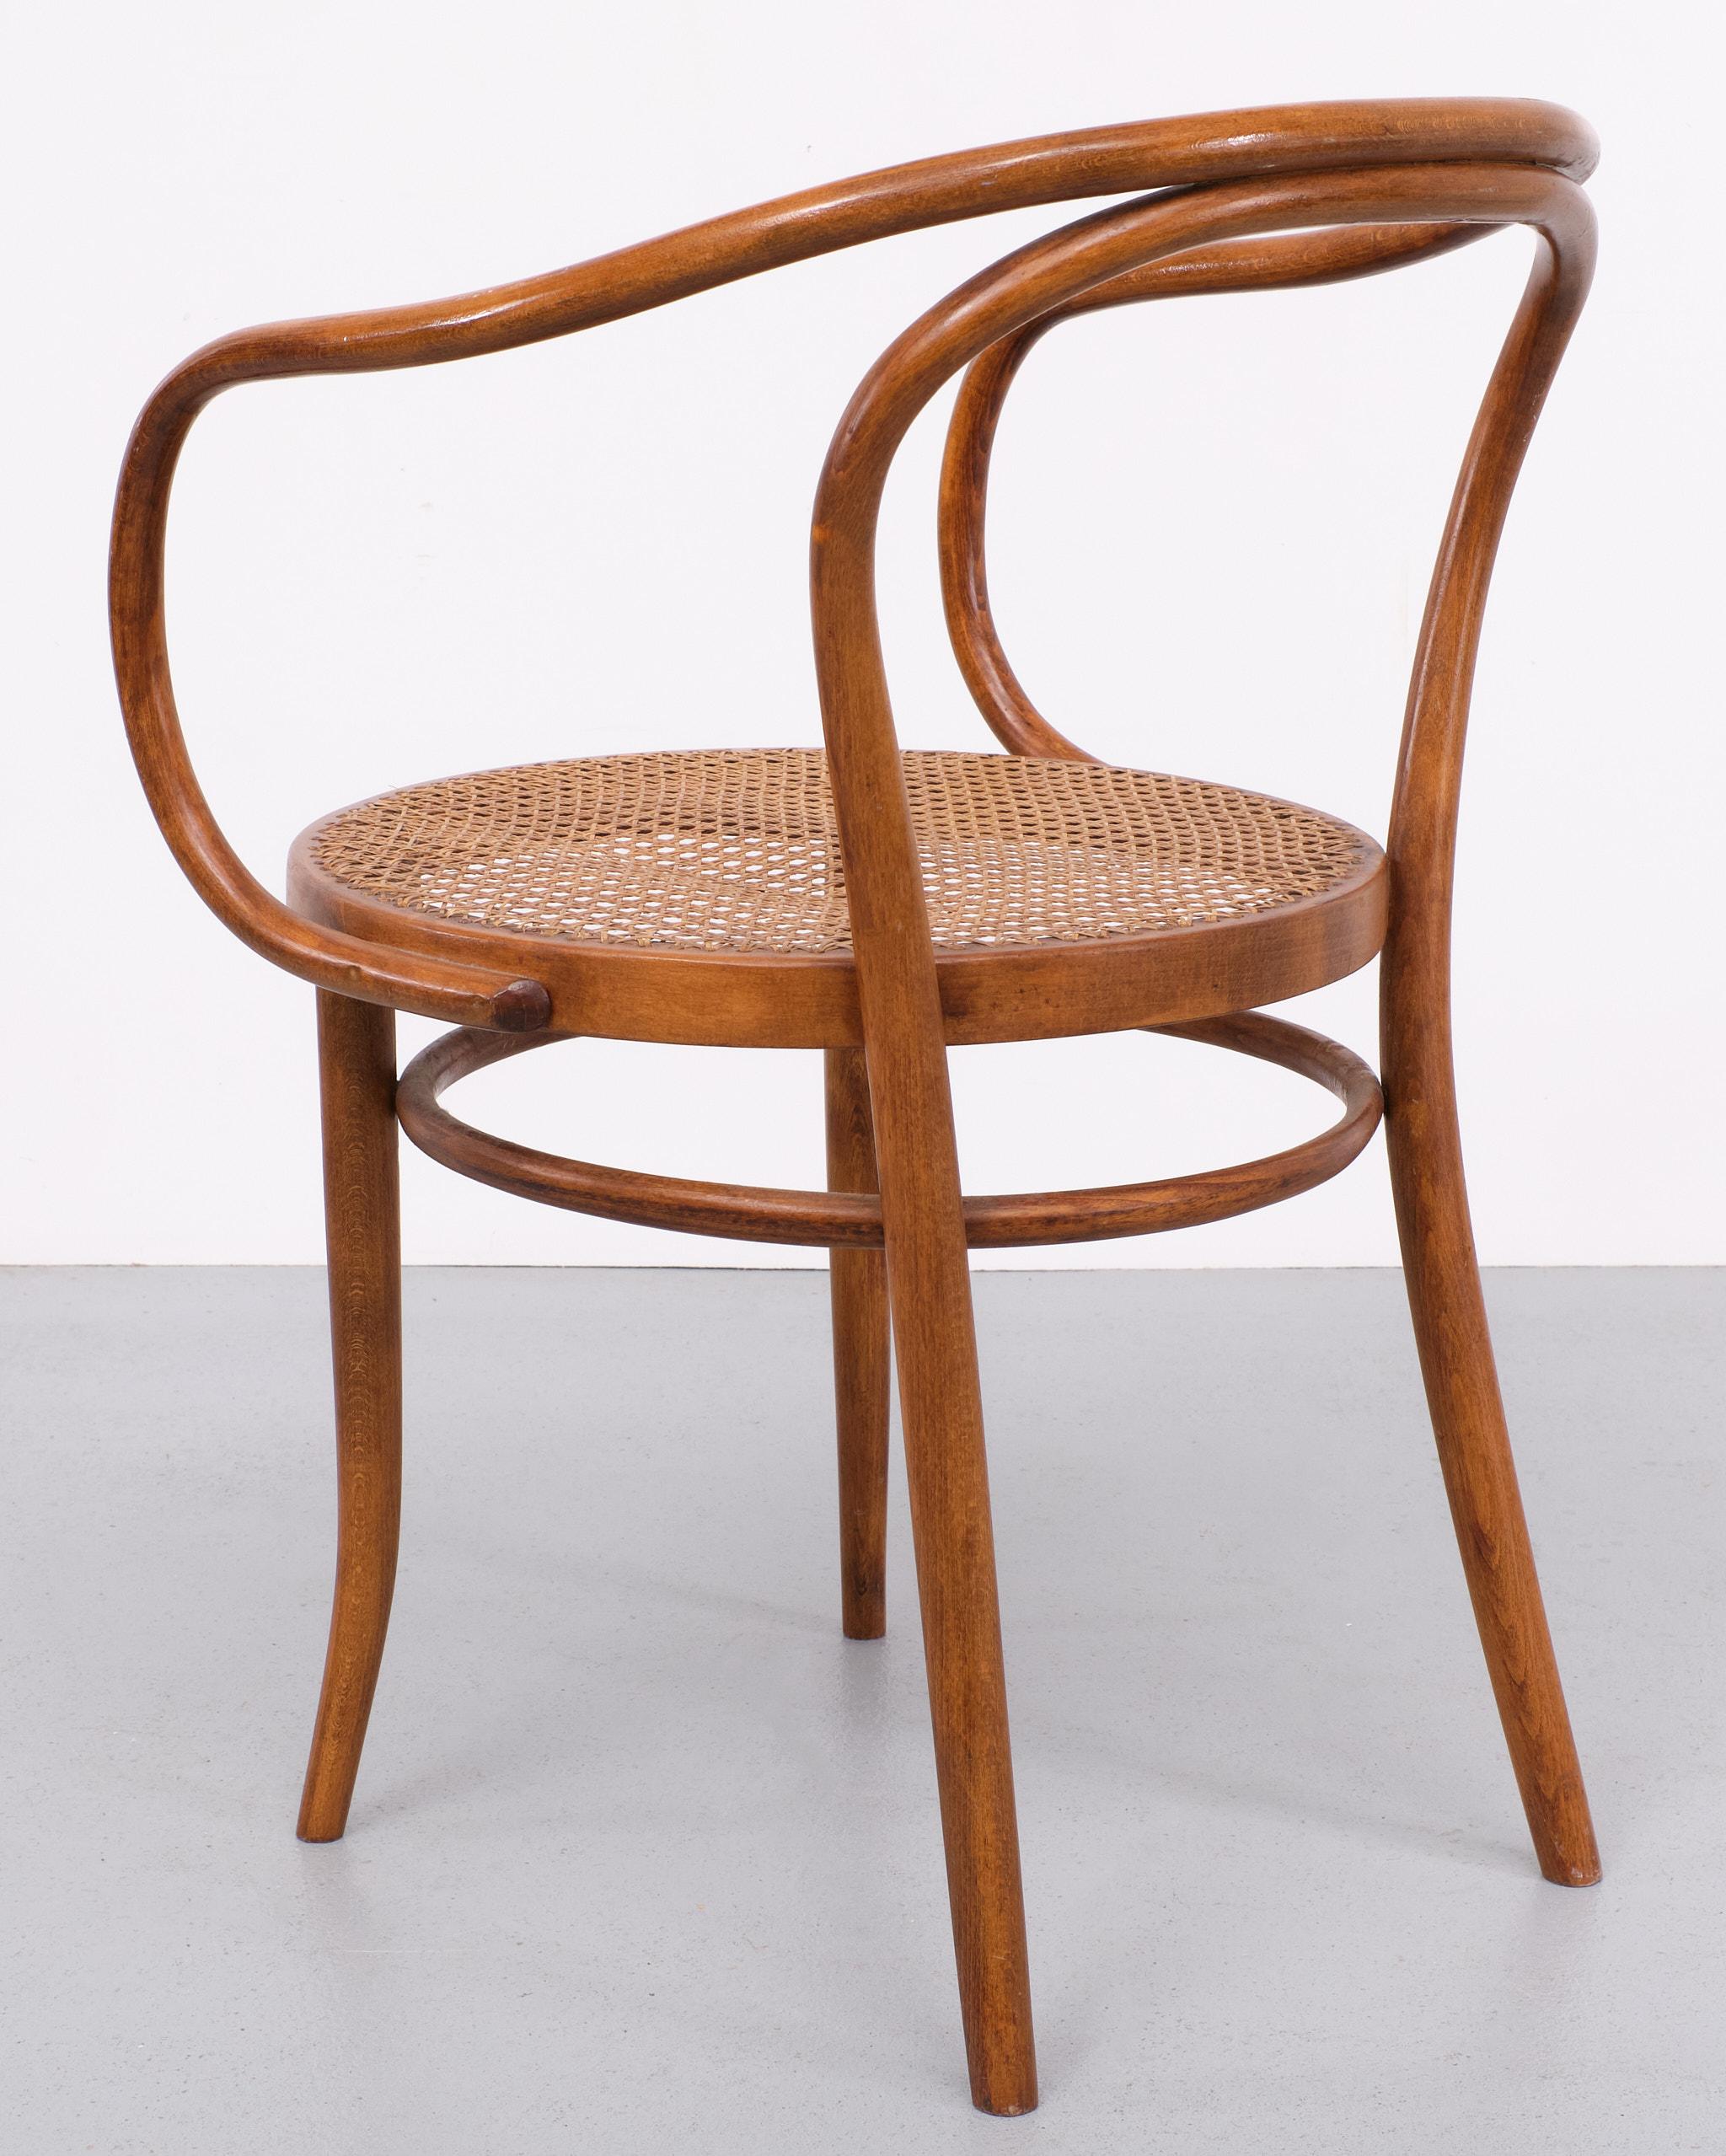 The B9 / 209 chair or Wiener Stuhl was designed around 1900 by Thonet. The chair has also gained fame because it was a favorite of the French designer Le Corbusier and was also given a place in his interiors. This copy of the chair was made in the